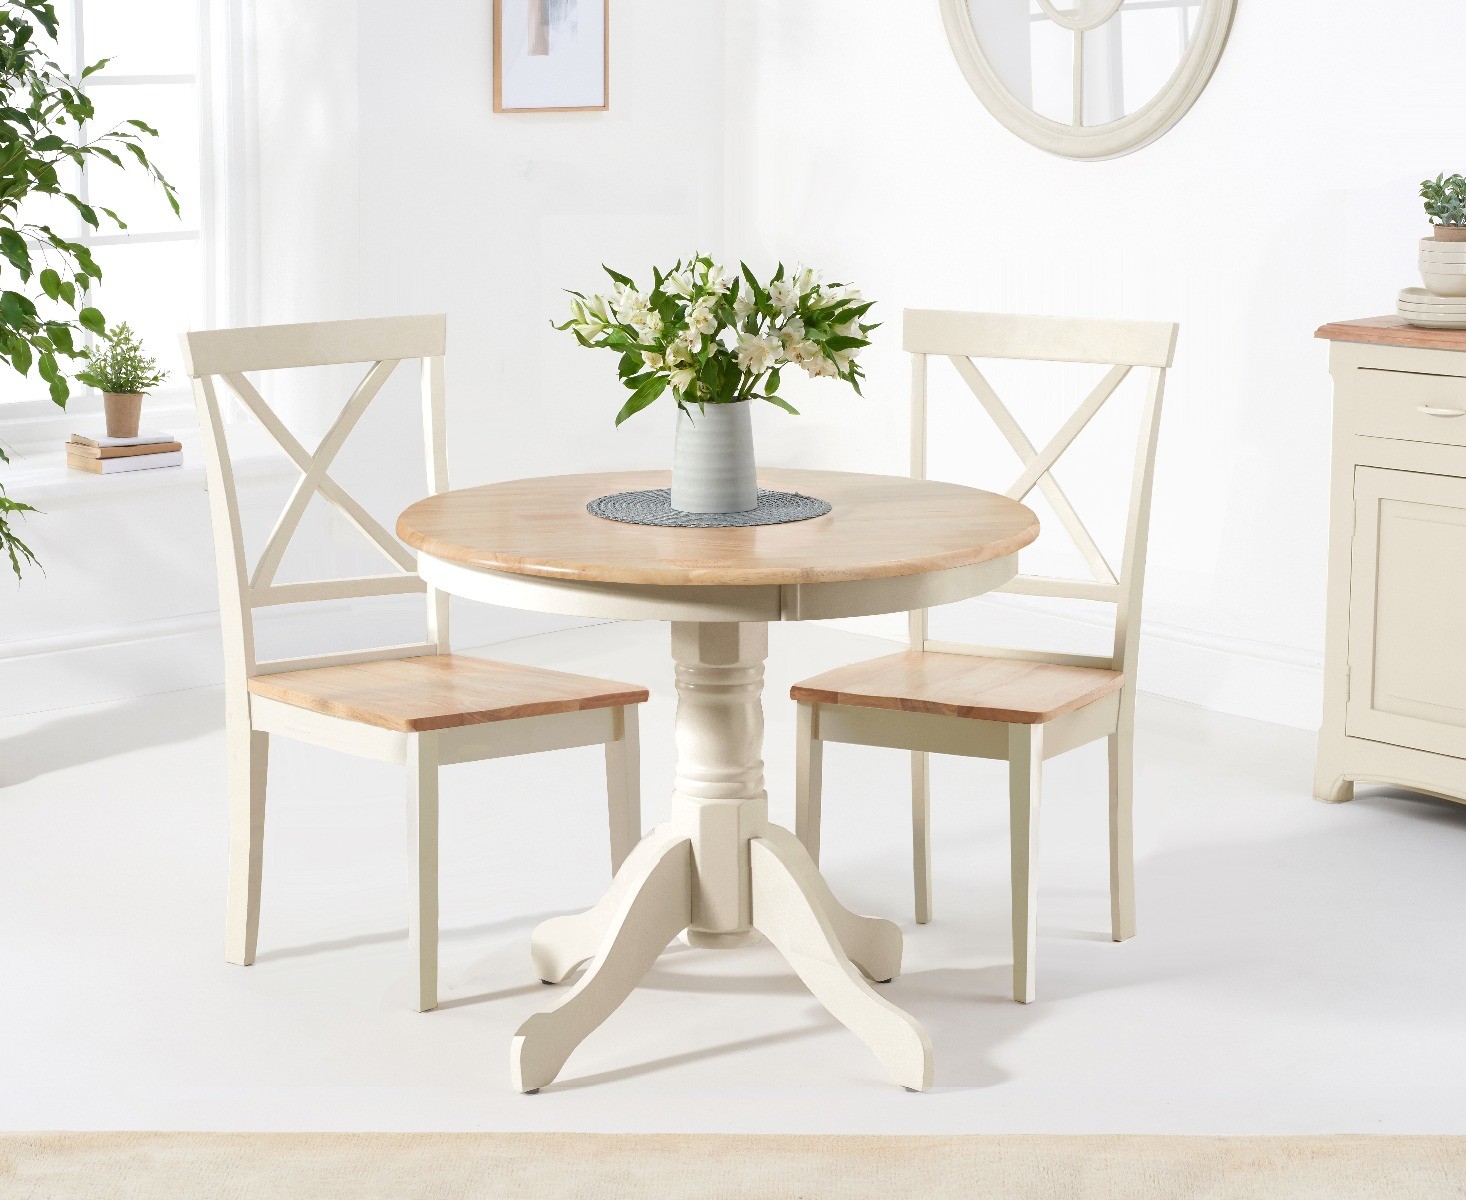 Epsom 90cm Oak And Cream Painted Dining Table With 4 Cream Chairs